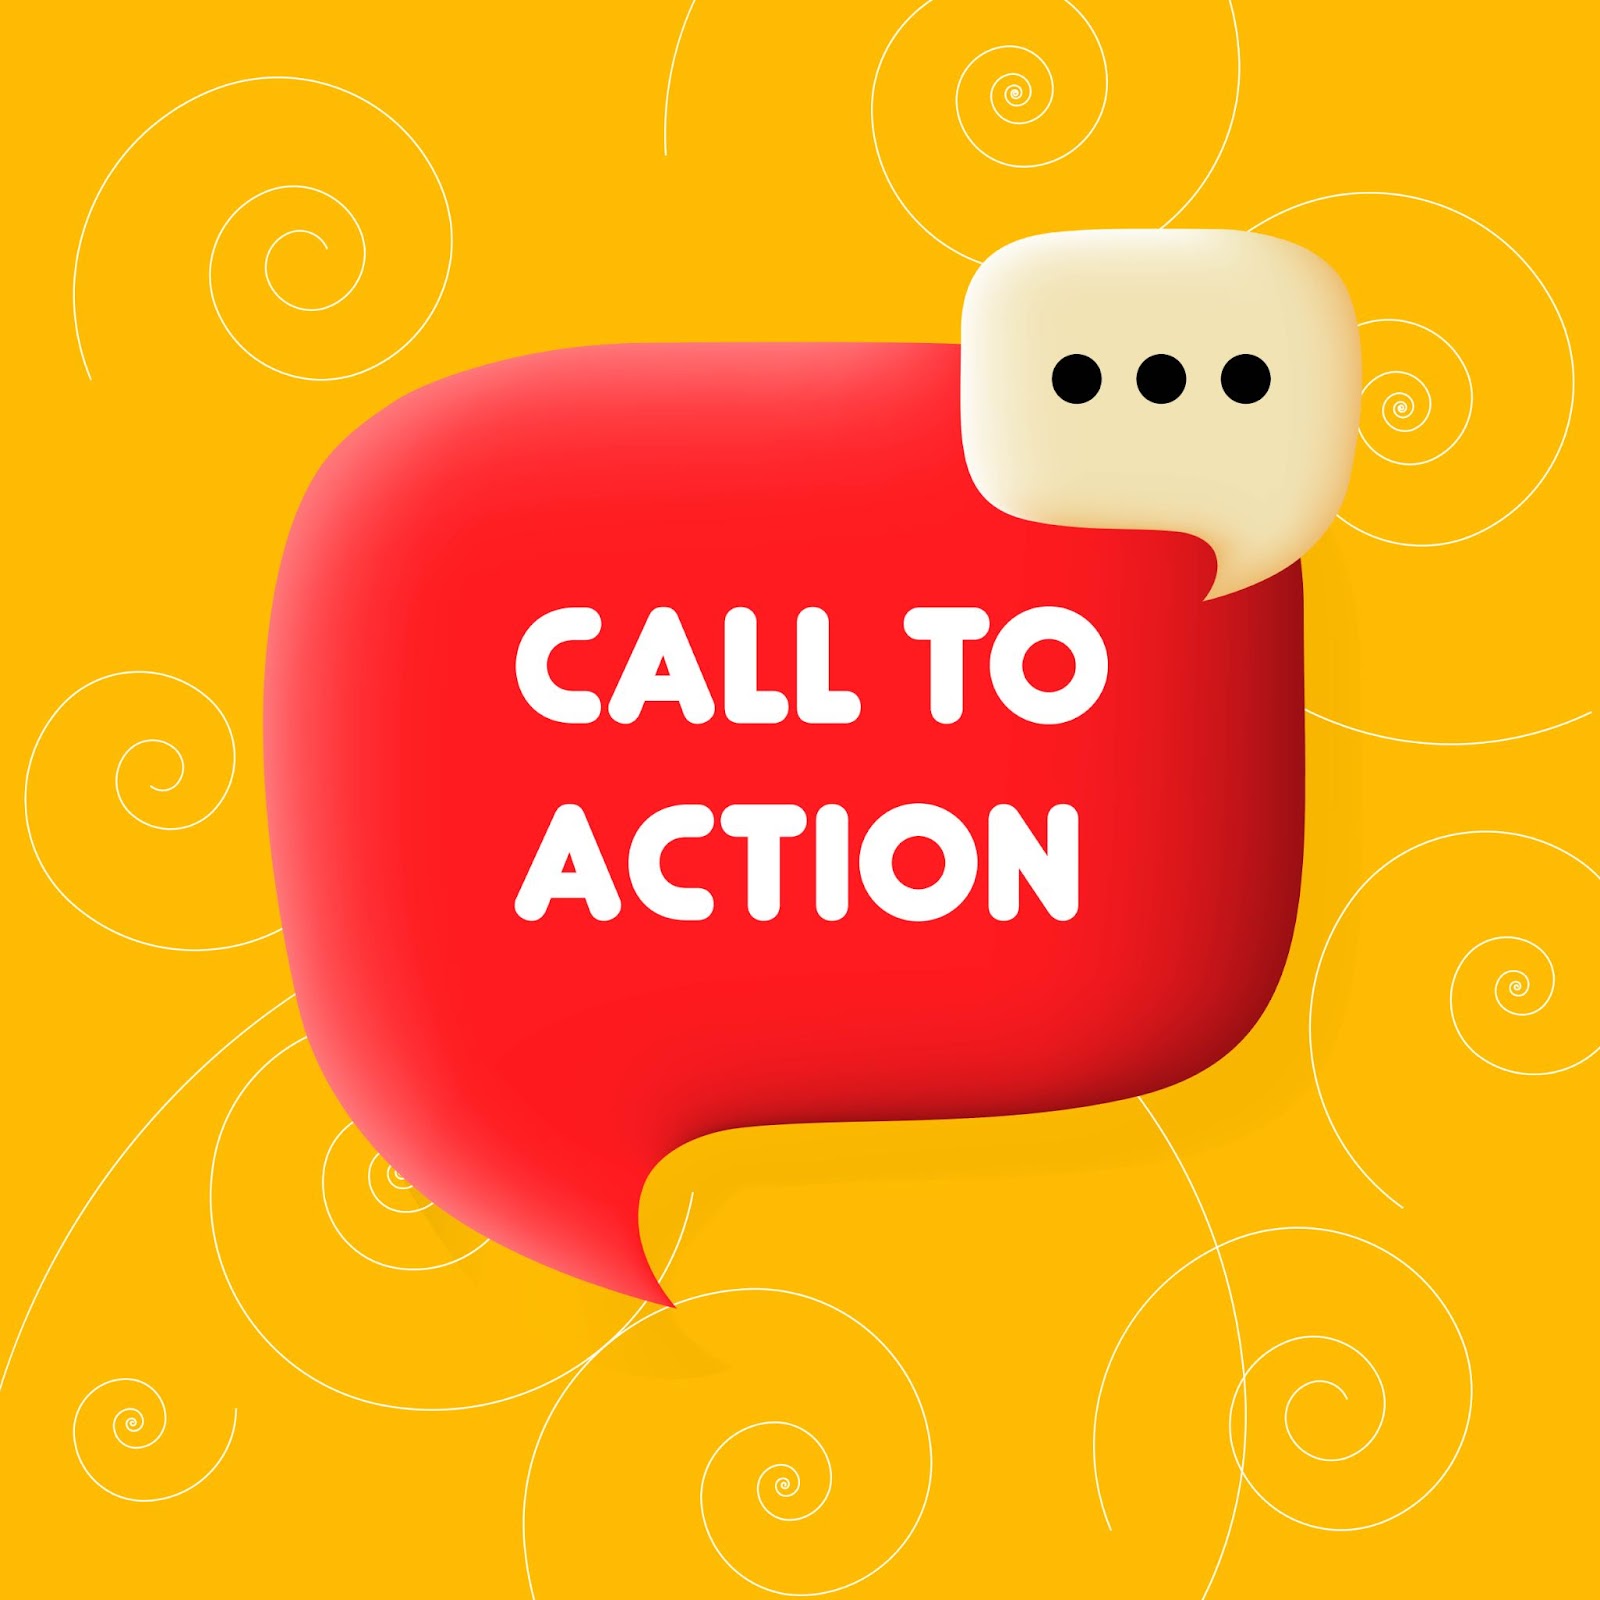 Call to action for follow up